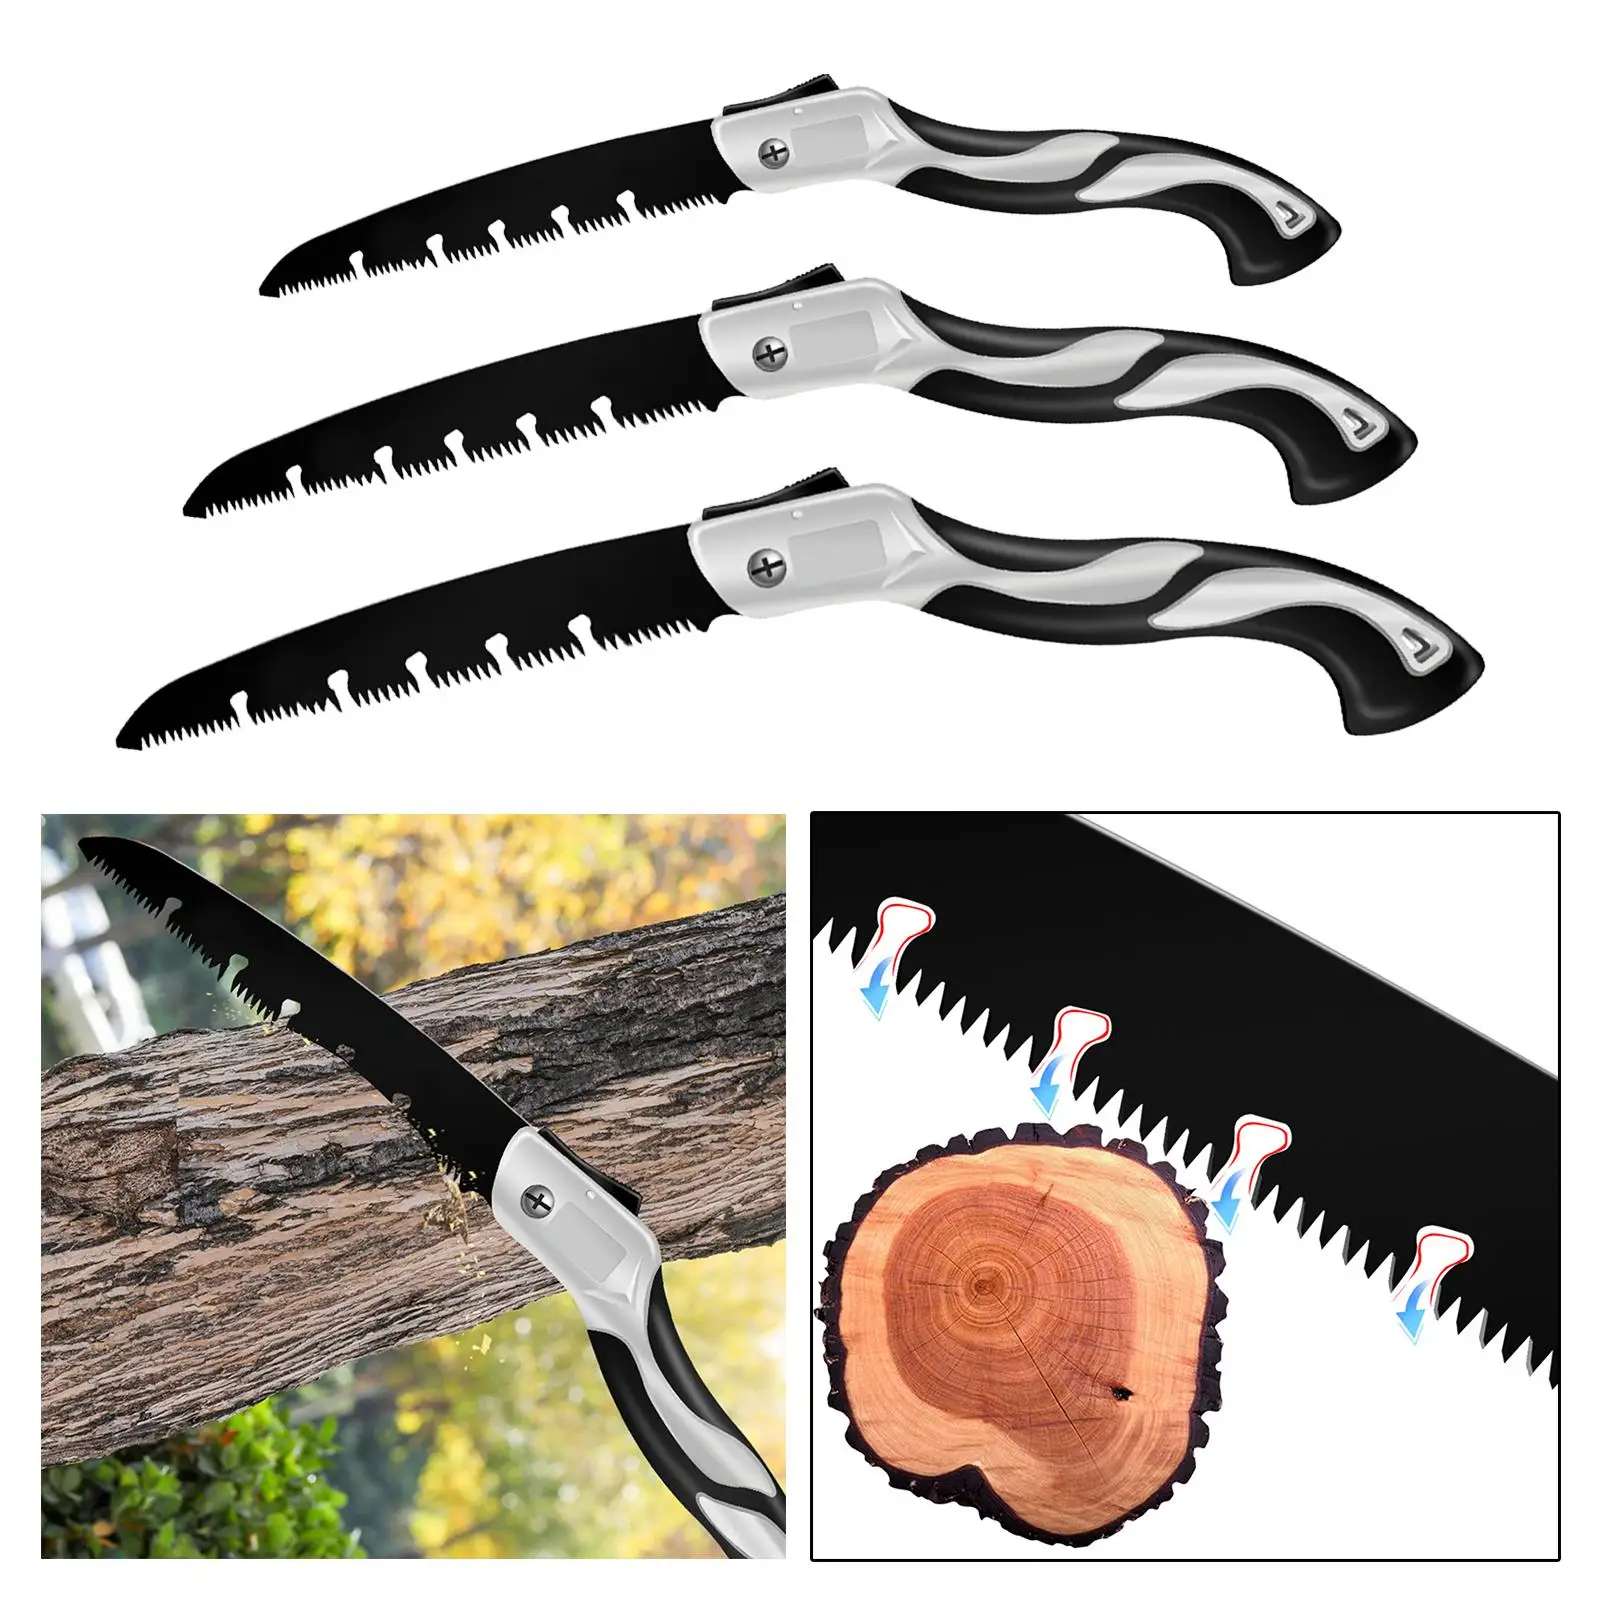 Woodworking Saw Household Tool Hand Saw Pruning Saw Folding Saw for Outdoors Bushcraft Hiking Garden Gardening